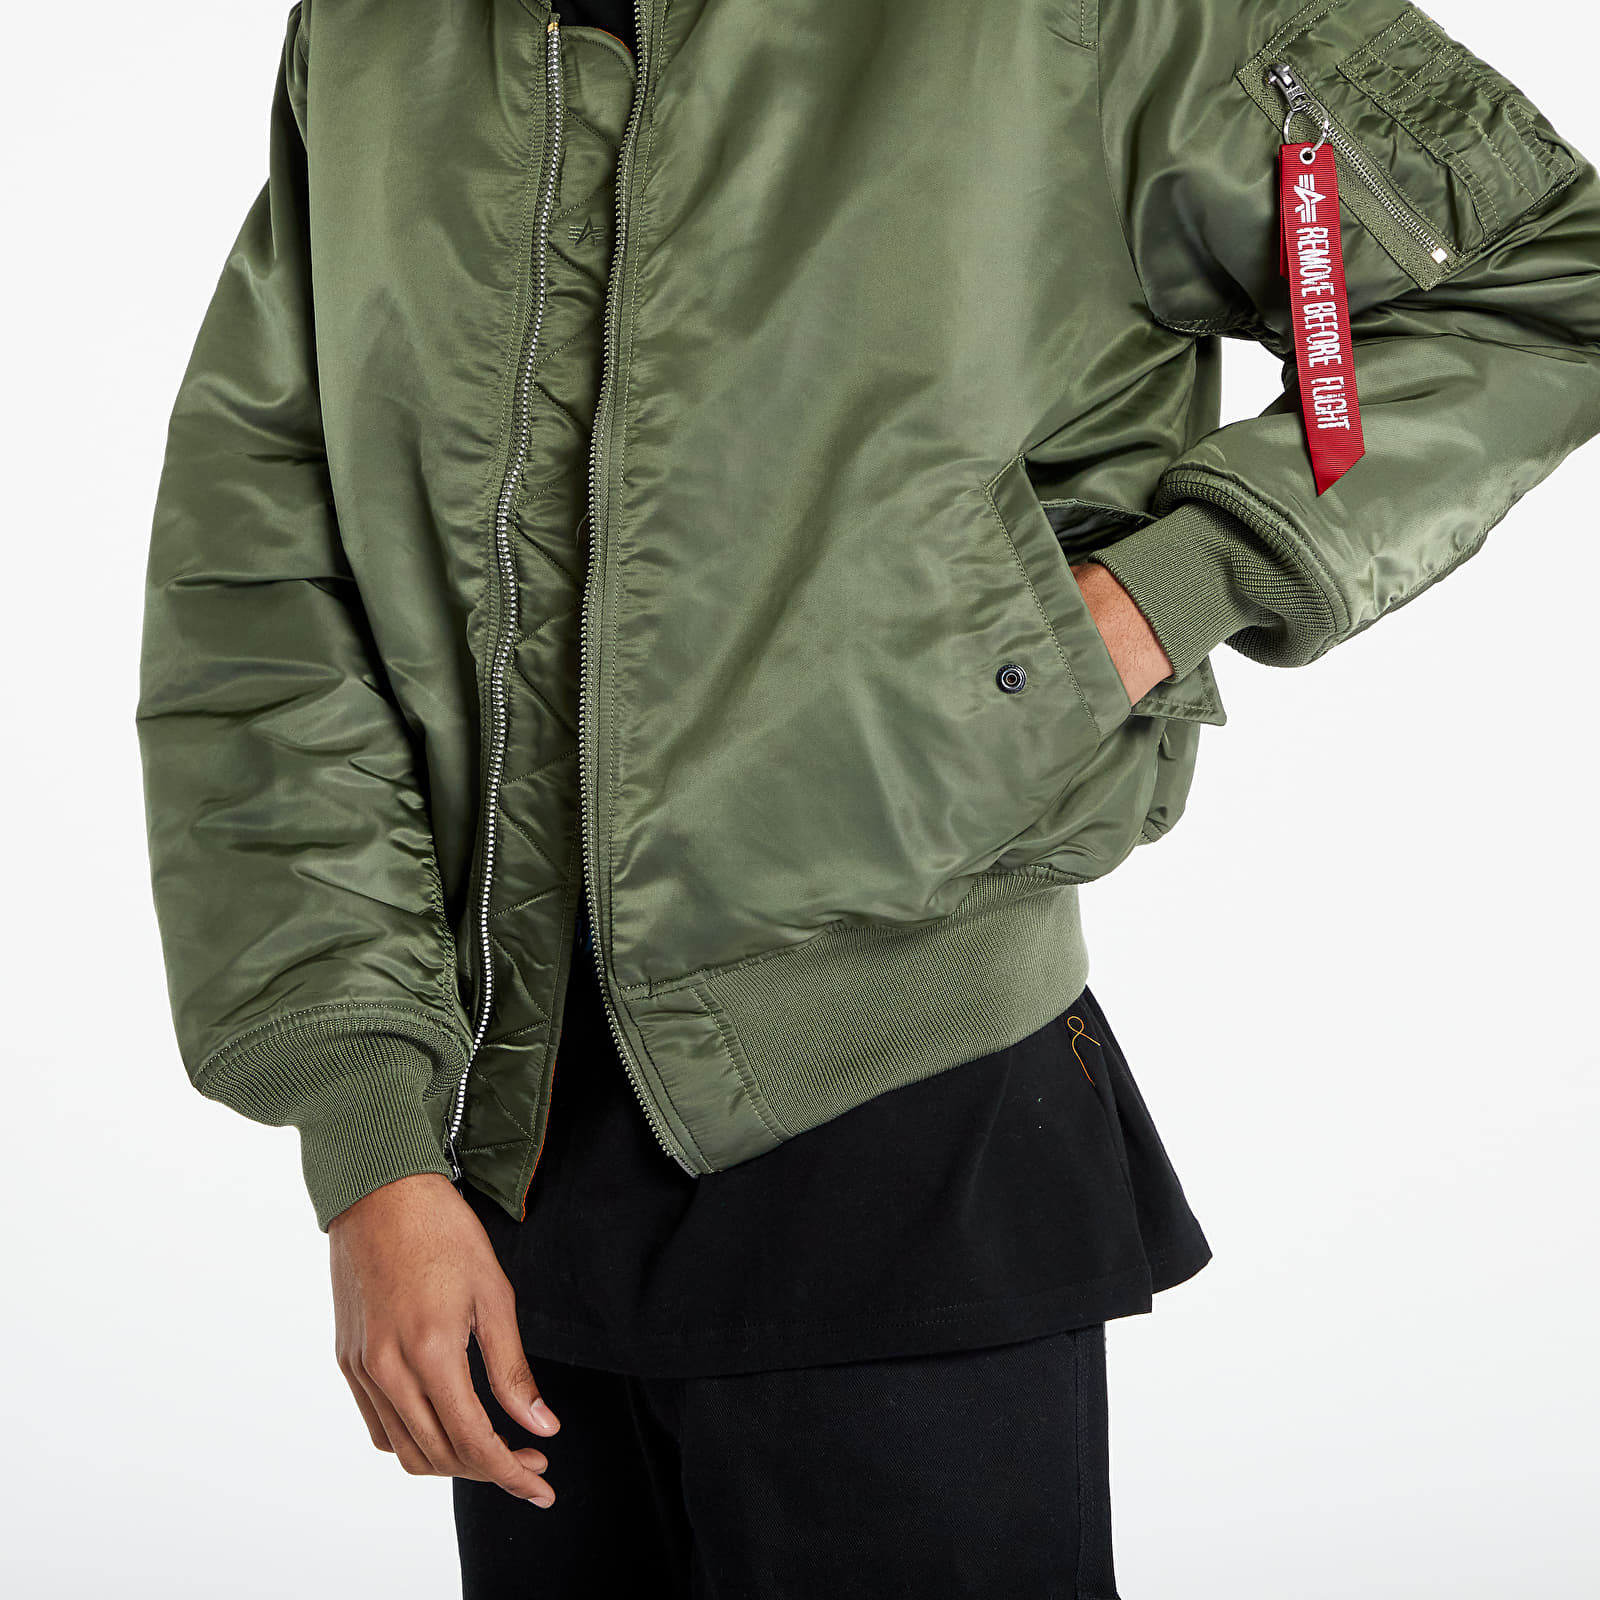 Jackets Alpha Industries MA - 1 olive green | Queens